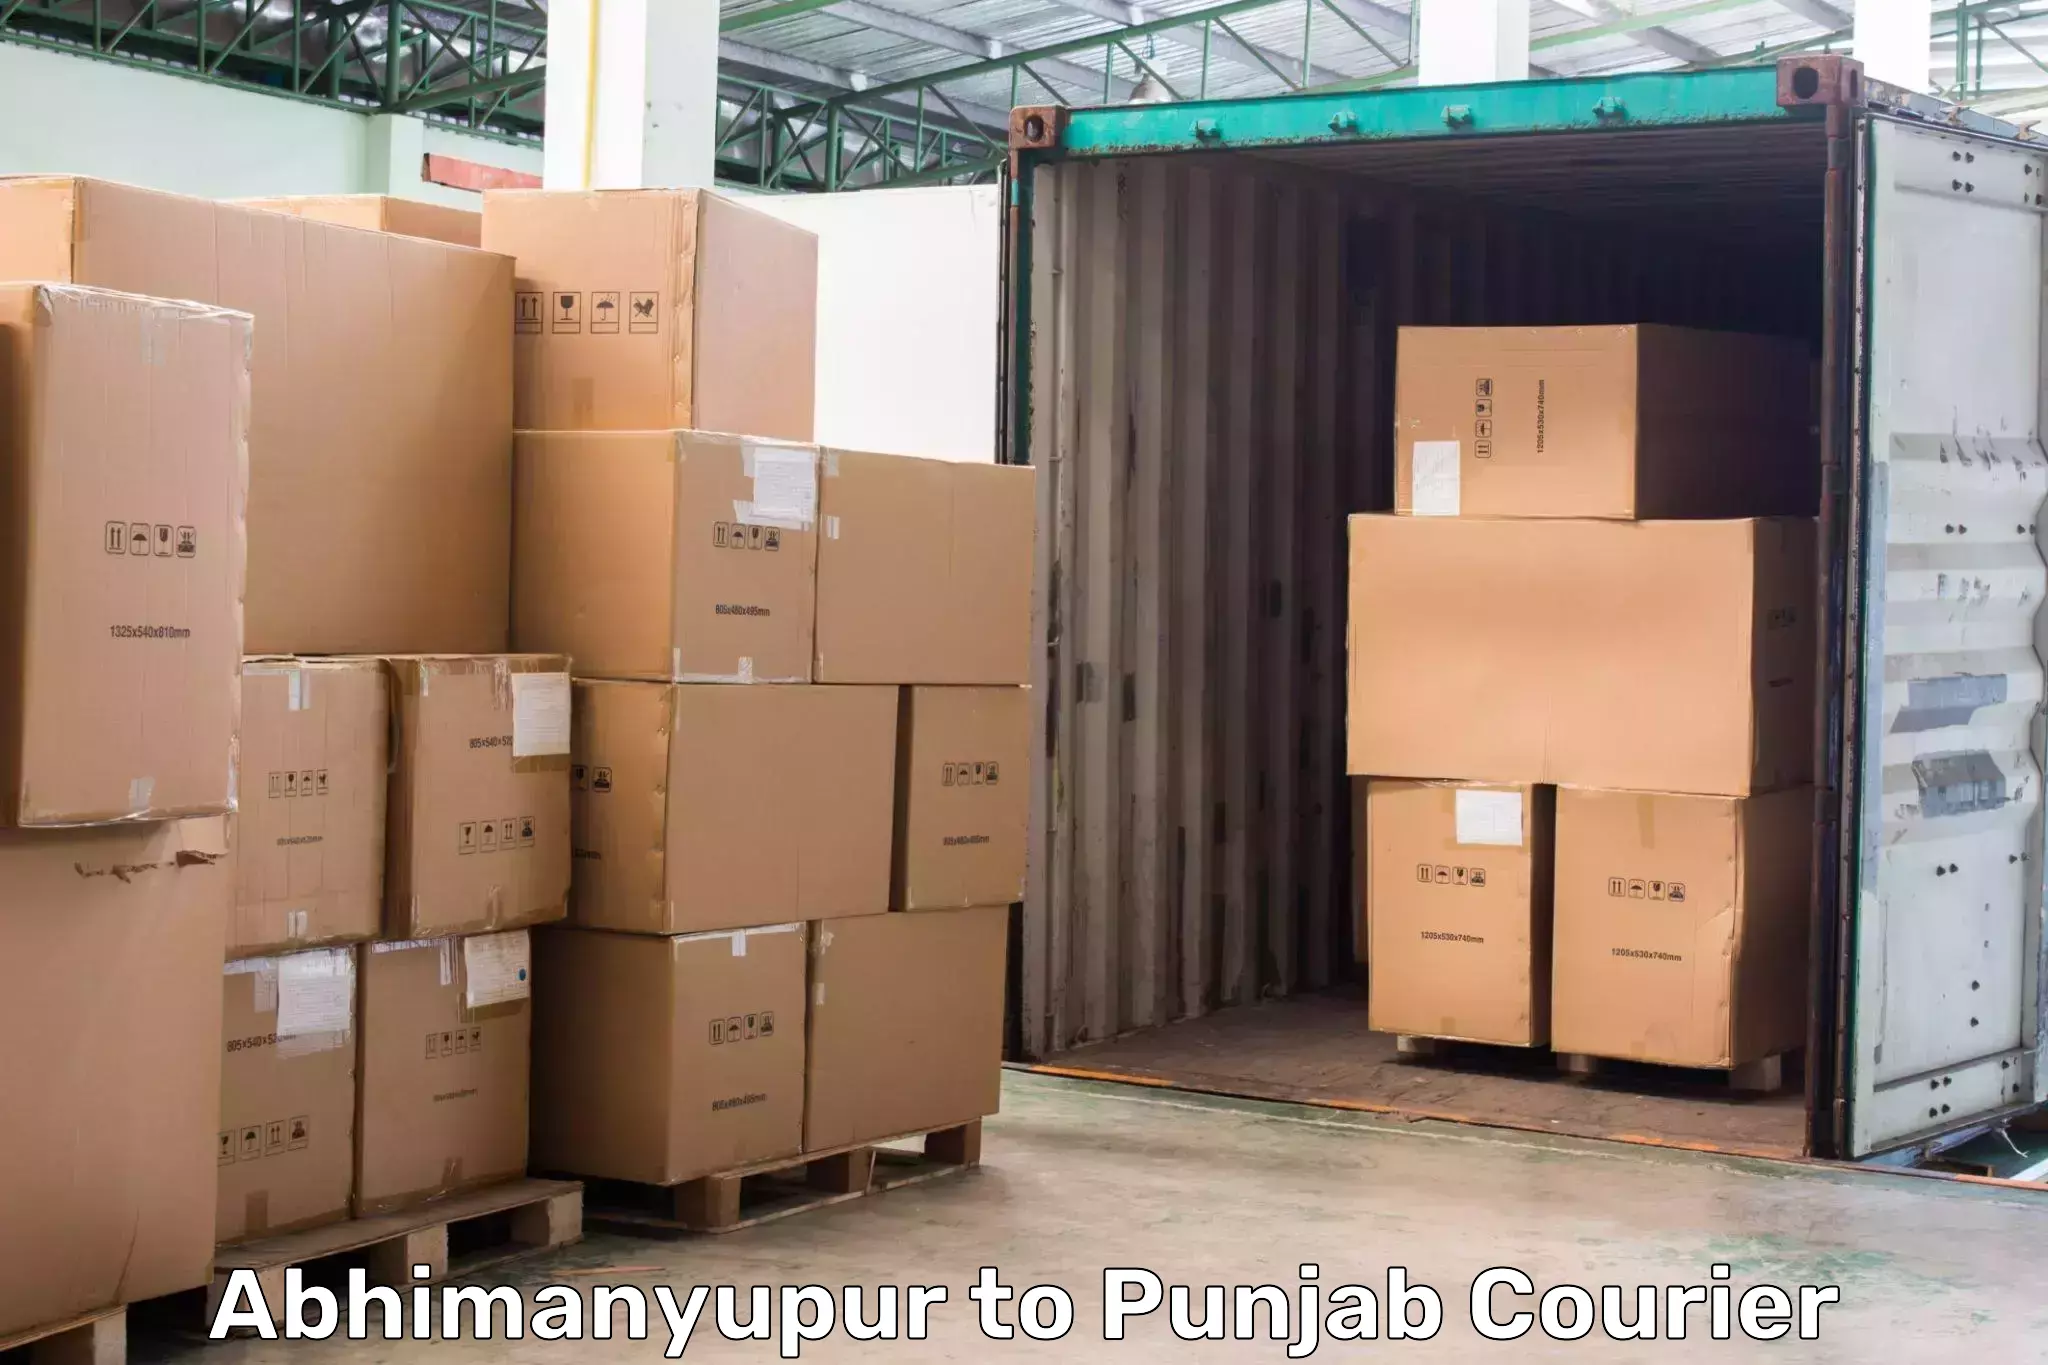 Comprehensive shipping network Abhimanyupur to Ajnala